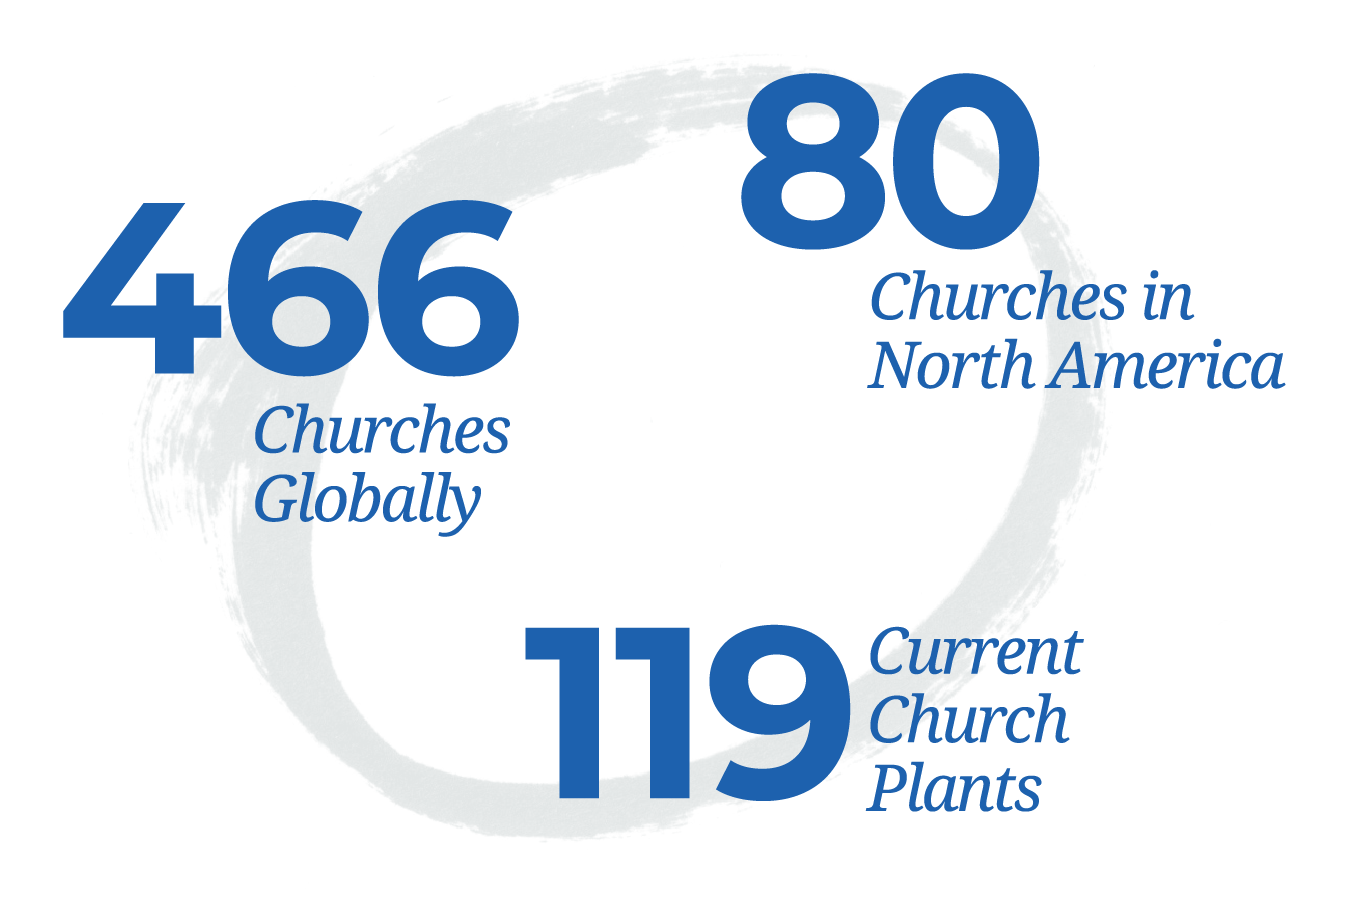 466 churches globally, 80 churches in North America, and 119 current church plants